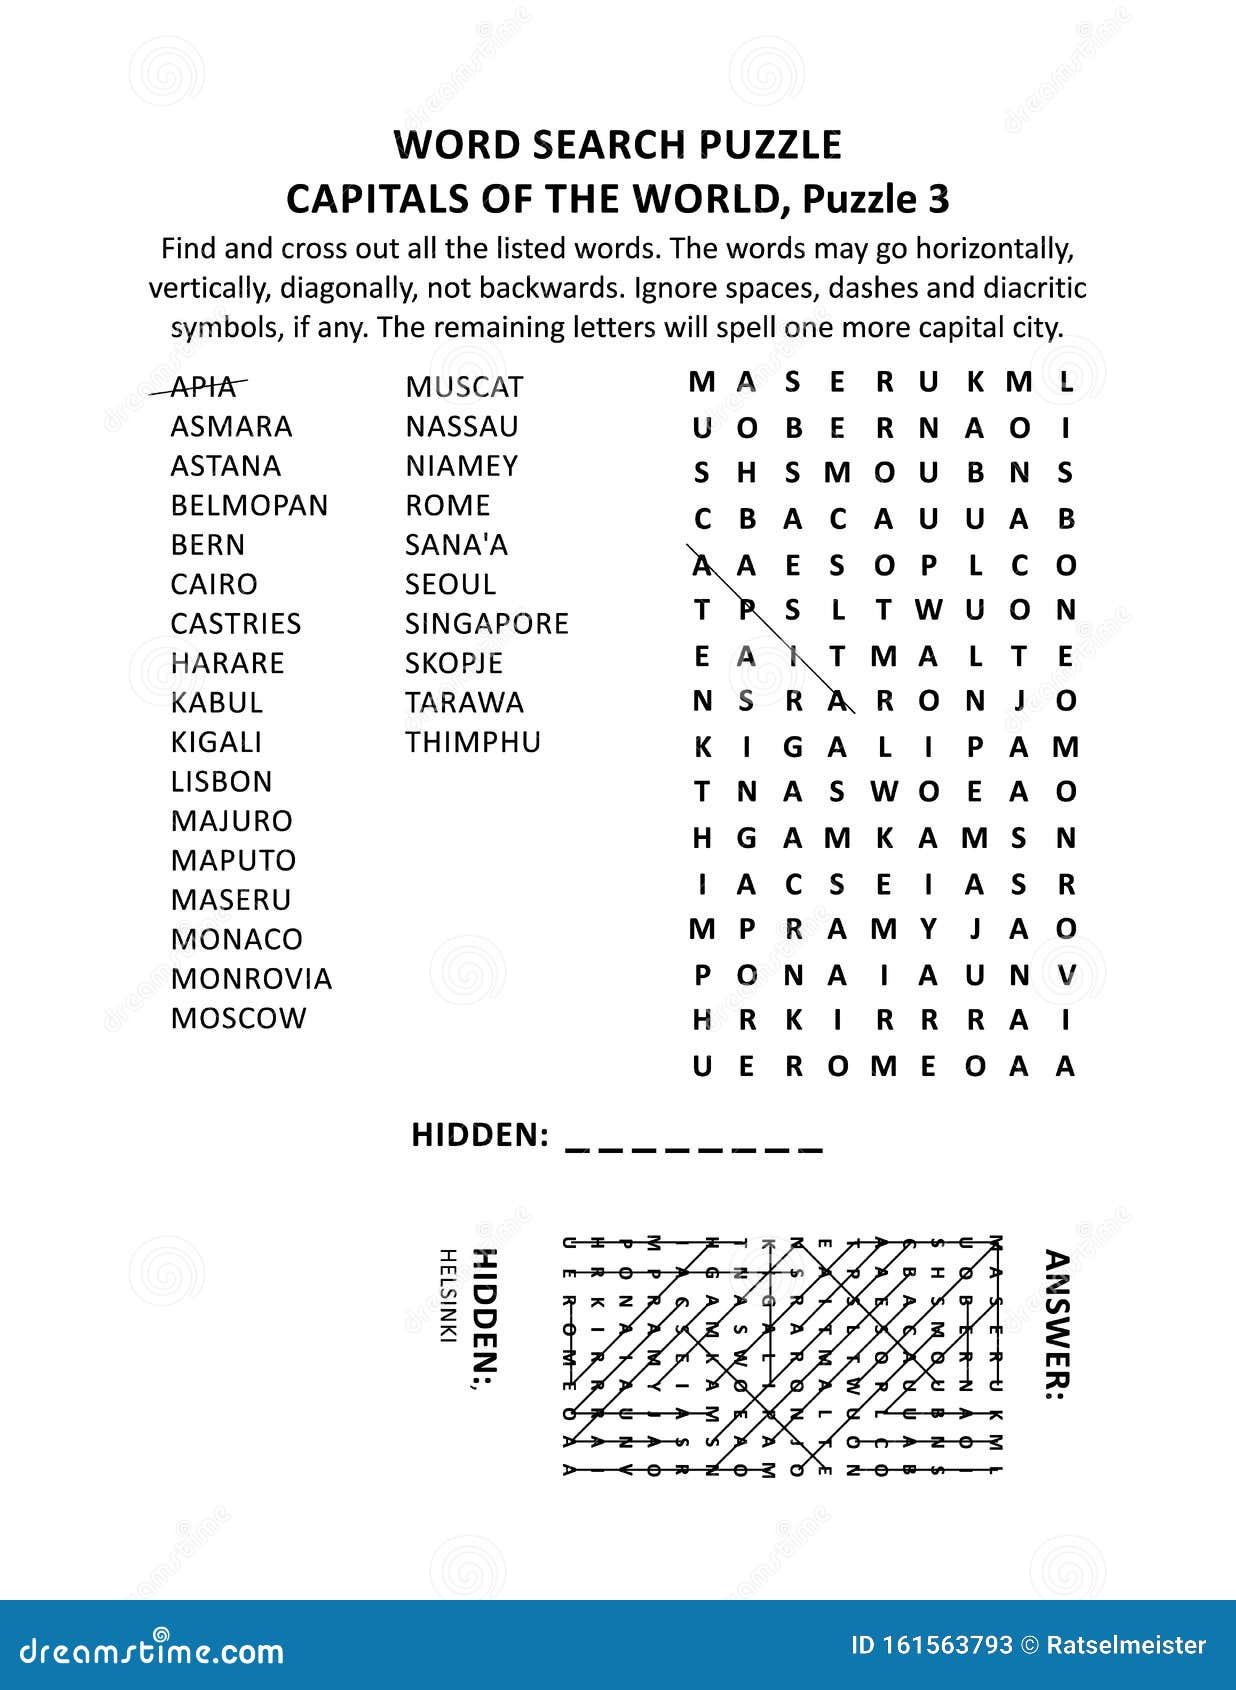 capitals of the world word search puzzle, puzzle 3 of 10